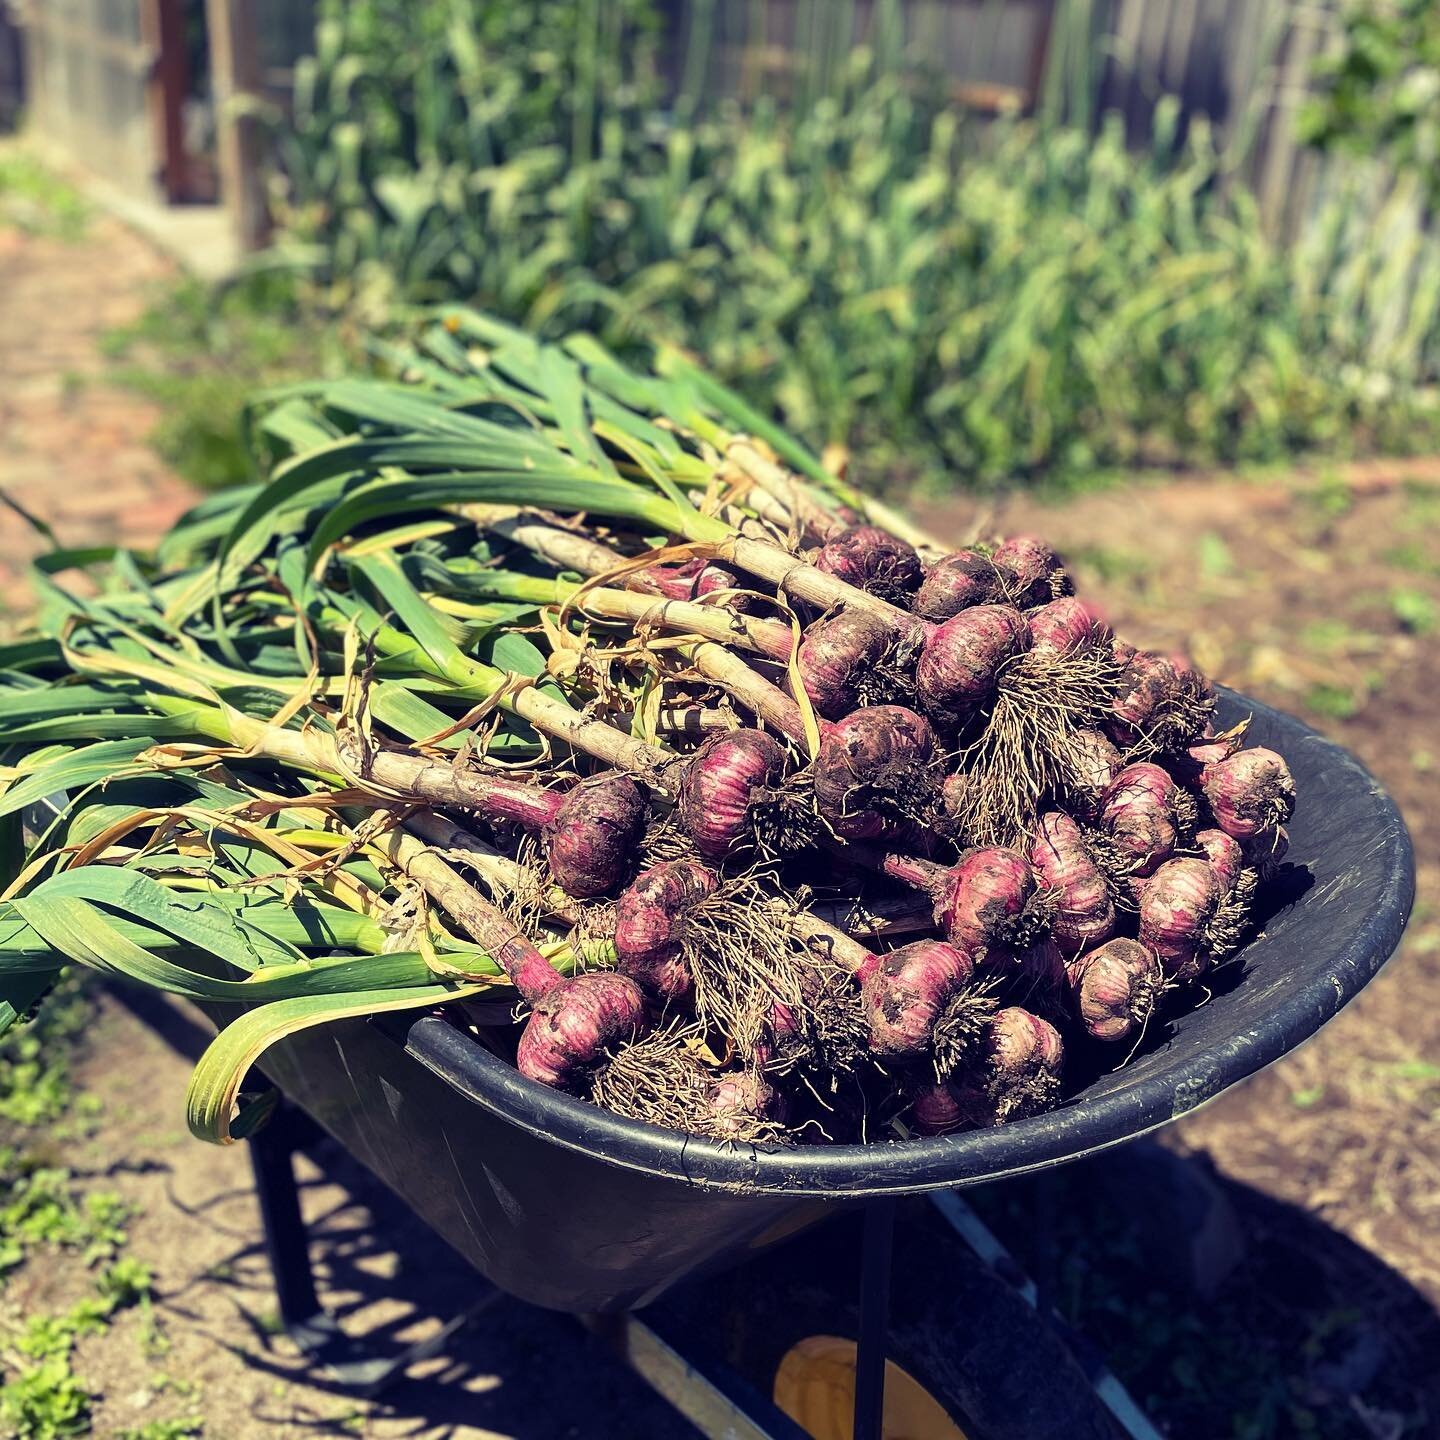 Harvest time! 🧄 It was a ridiculously wet spring this year so we&rsquo;ve been a bit nervous about our garlic going soggy. We don&rsquo;t usually pull them up this early but with 20-40mm rain forecast for later today we&rsquo;re not taking any chanc